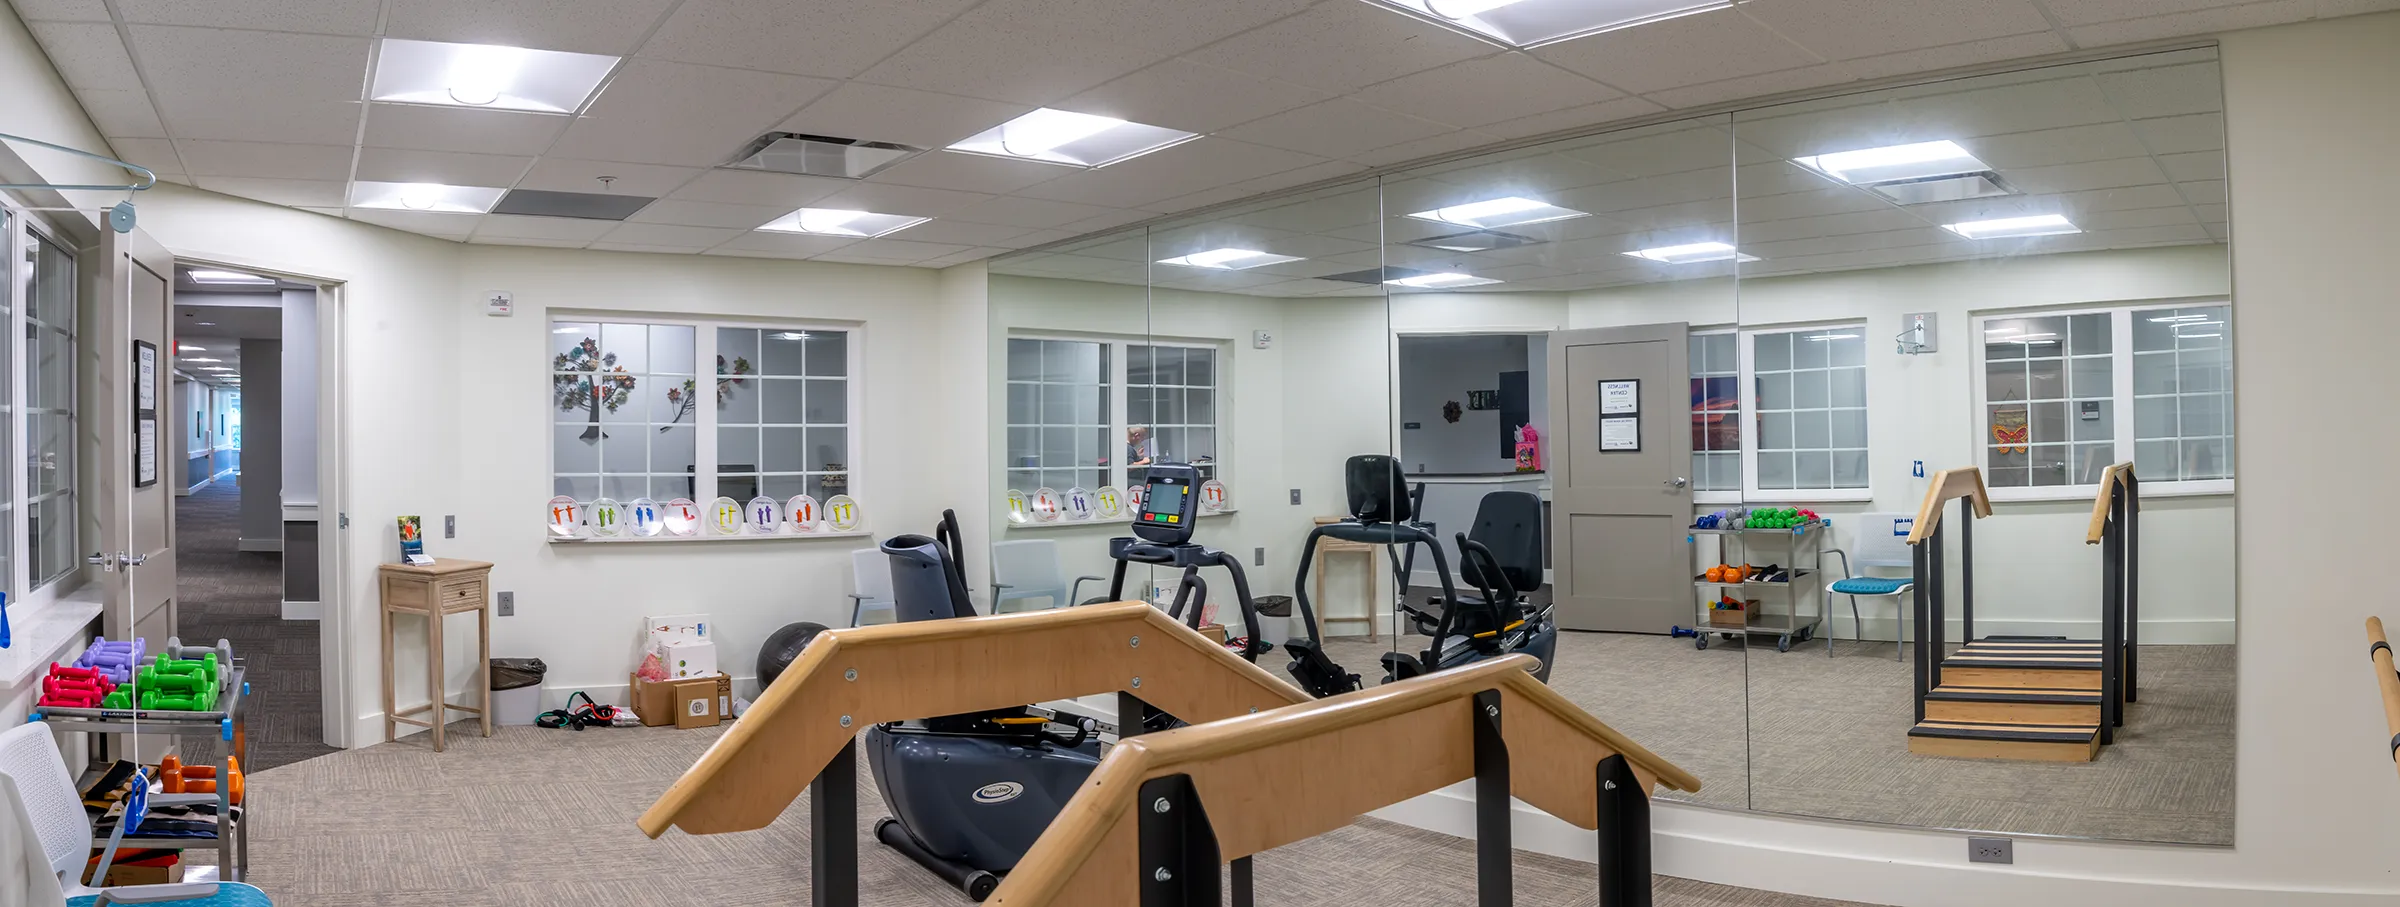 Image of fitness/rehab room at assisted living community